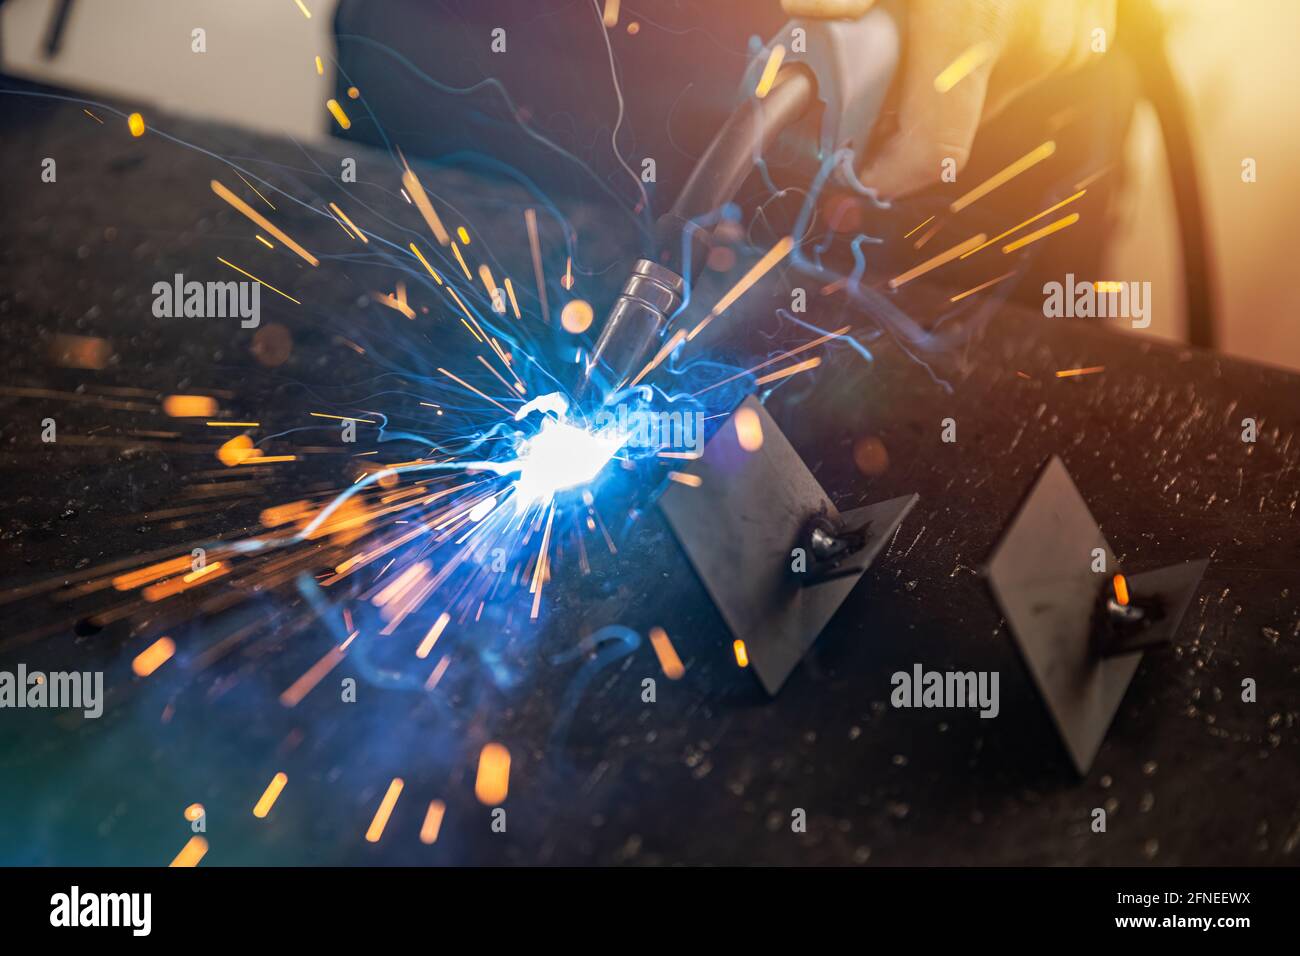 Industry worker welding iron pieces at work. Metalwork manufacturing and construction maintenance service Stock Photo